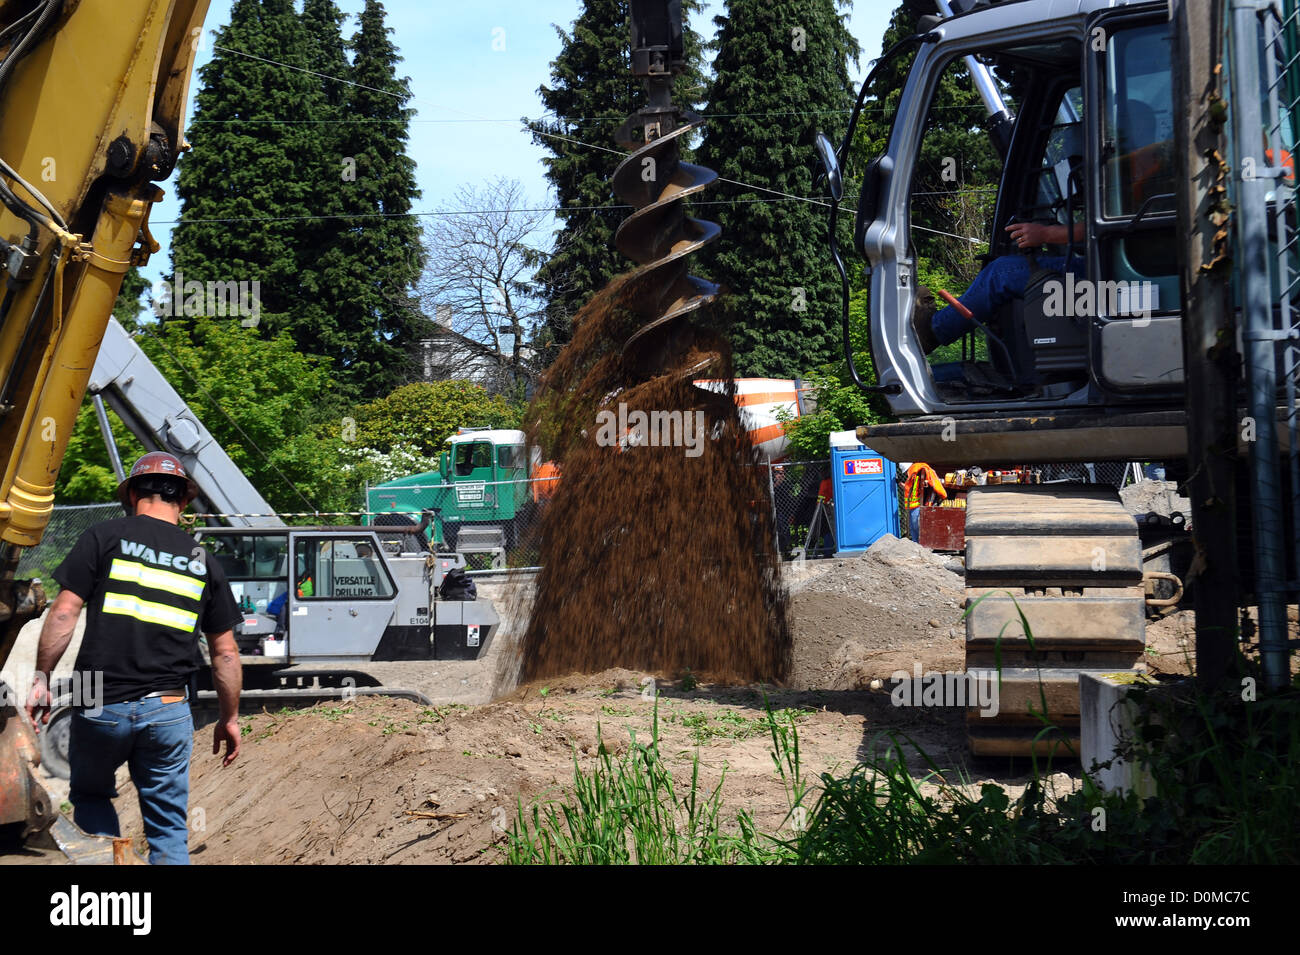 Drilling equipment at a construction site Stock Photo